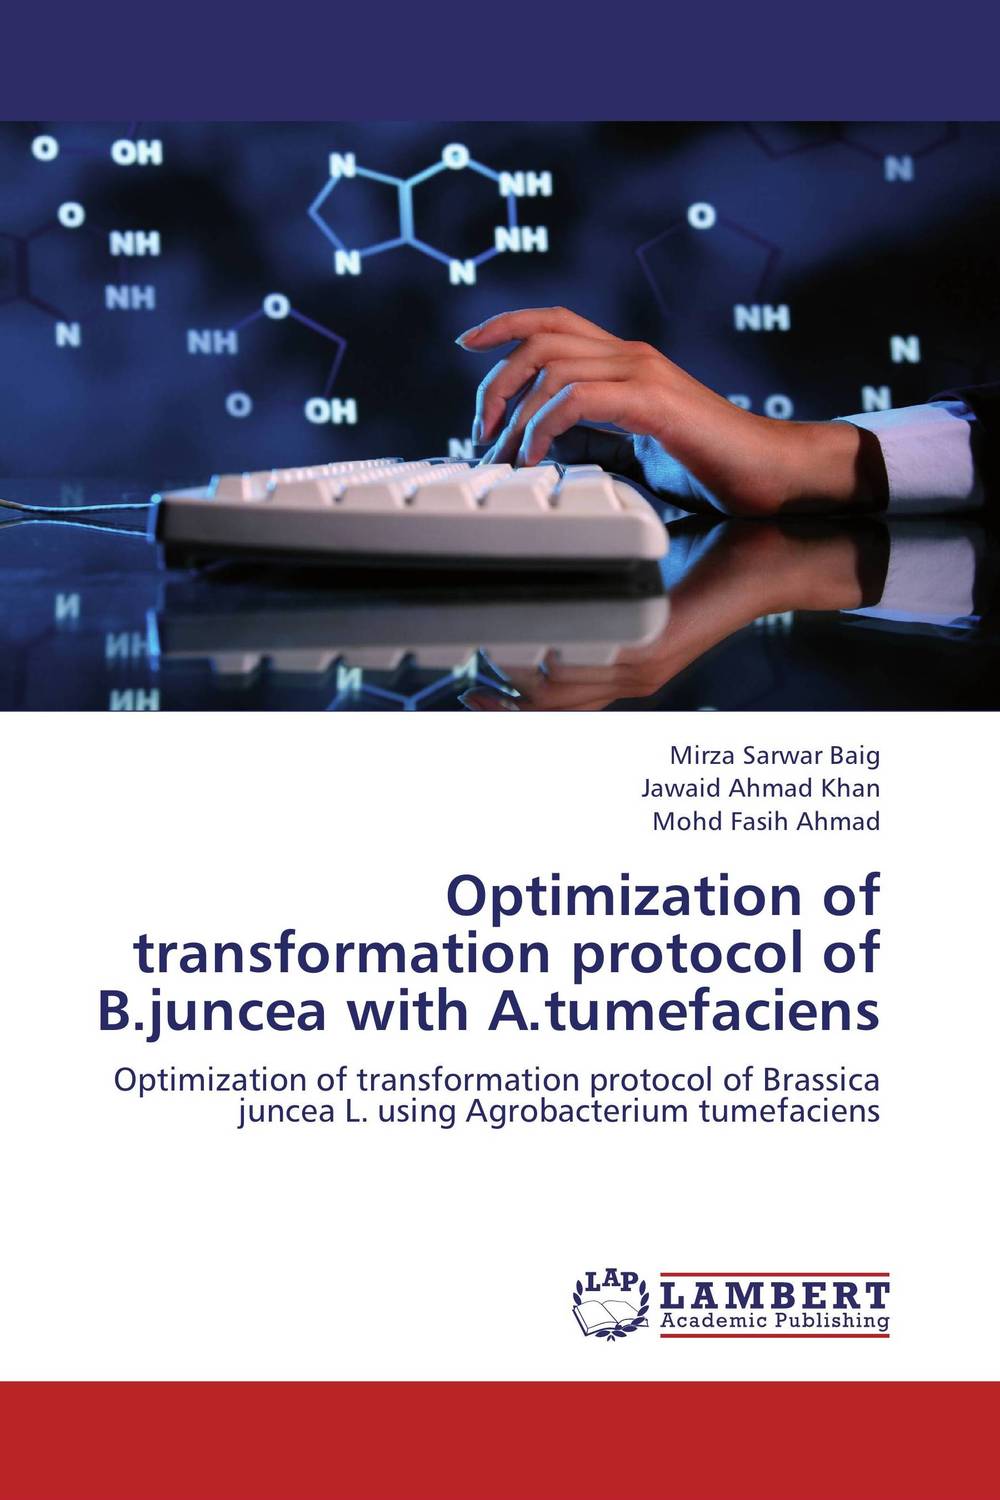 Optimization of transformation protocol of B.juncea with A.tumefaciens